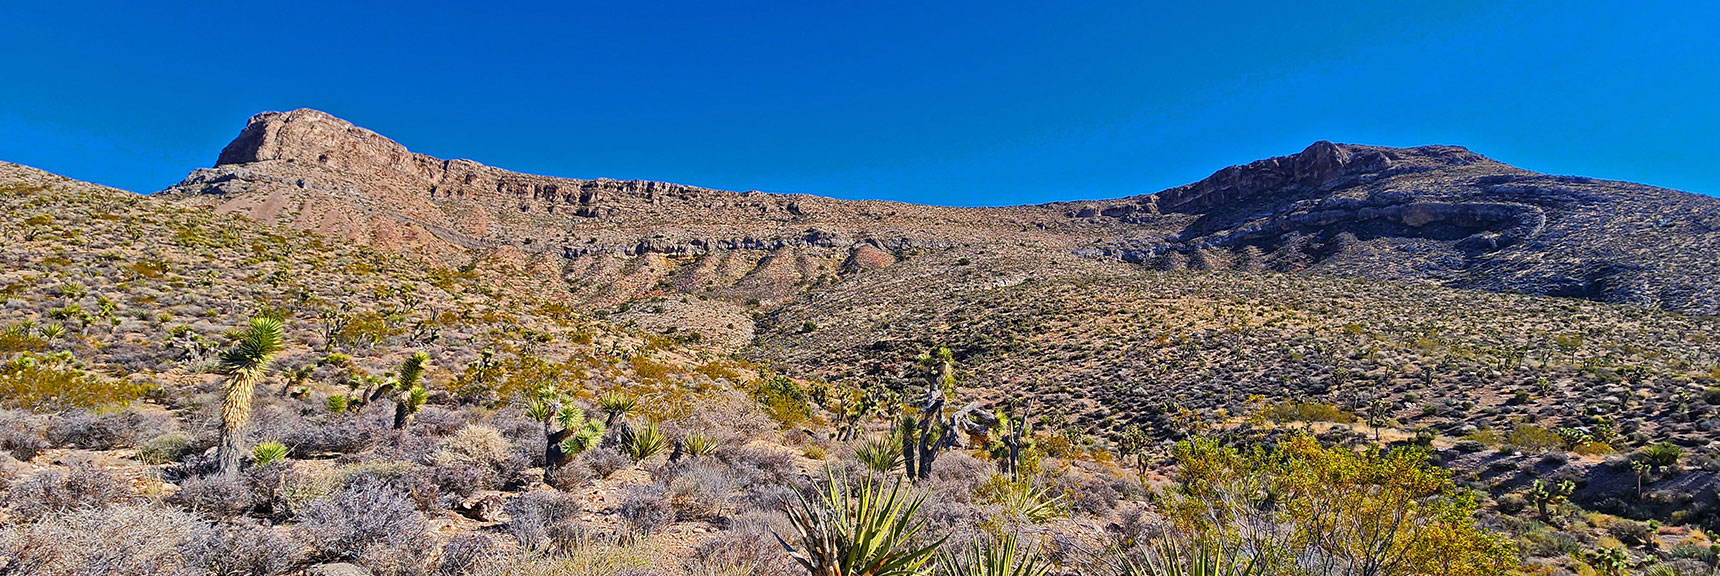 Third Canyon Ridge from North. Best Summit Approach Yet. This May Be the Key. | Landmark Bluff Circuit | Lovell Canyon, Nevada